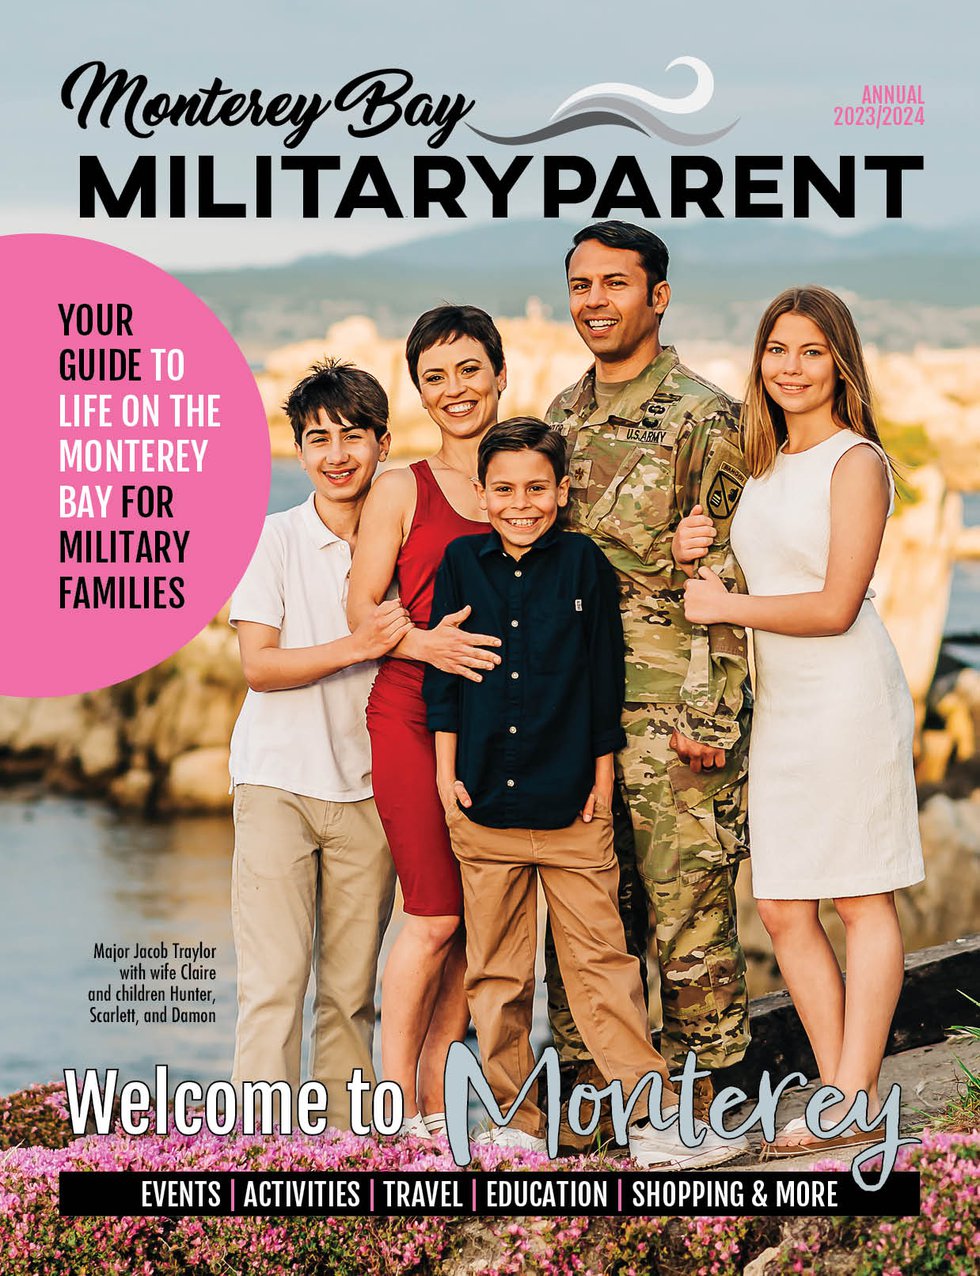 July Military Parent 2023 cover.jpg